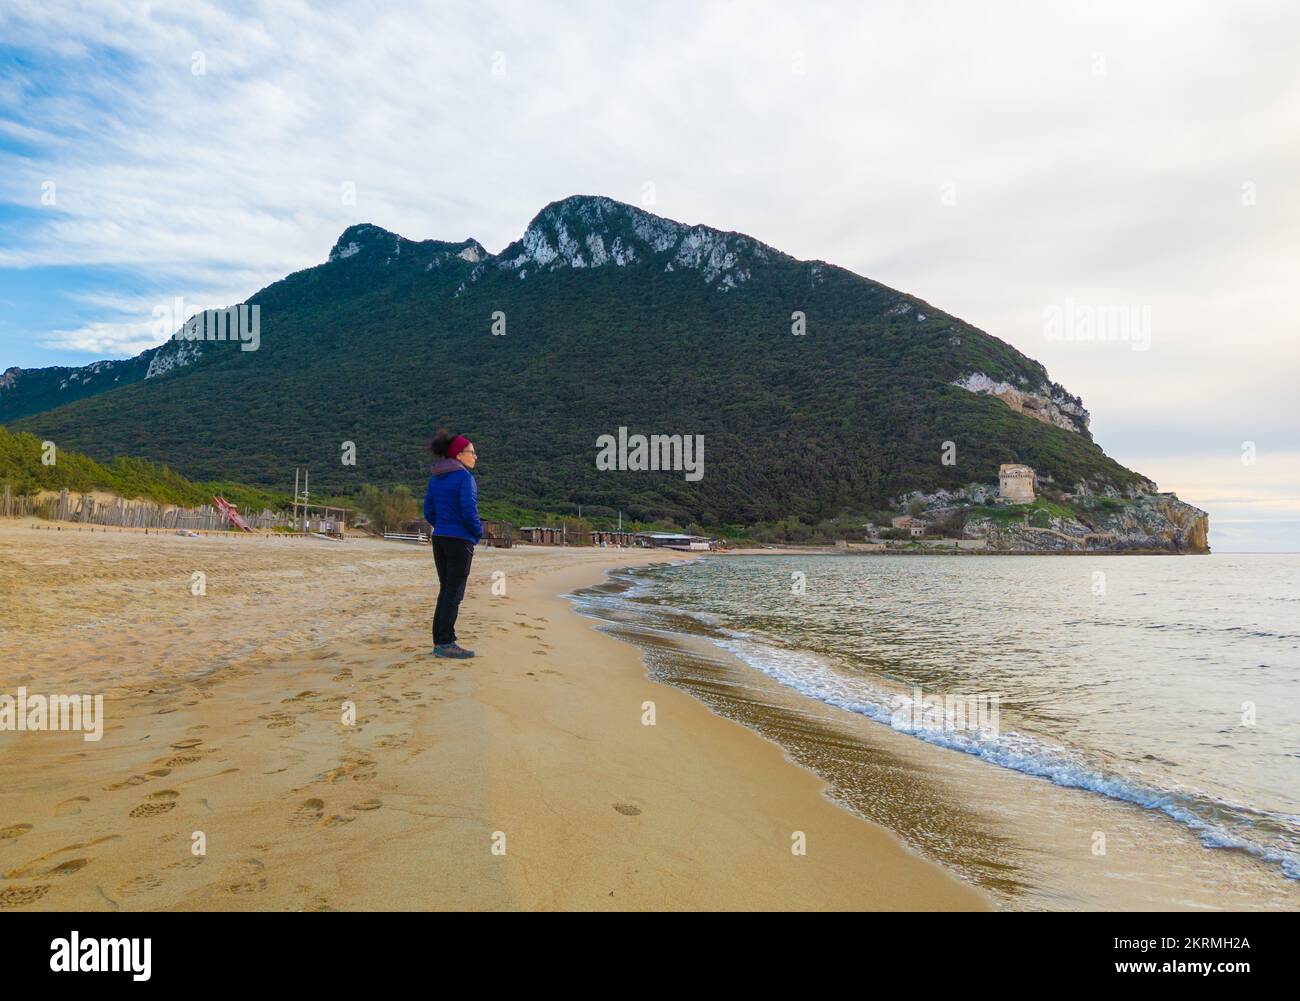 Mount Circeo (Latina, Italy) - The famous mountain on the Tirreno sea, in the province of Latina, very popular with hikers for its beautiful landscape Stock Photo